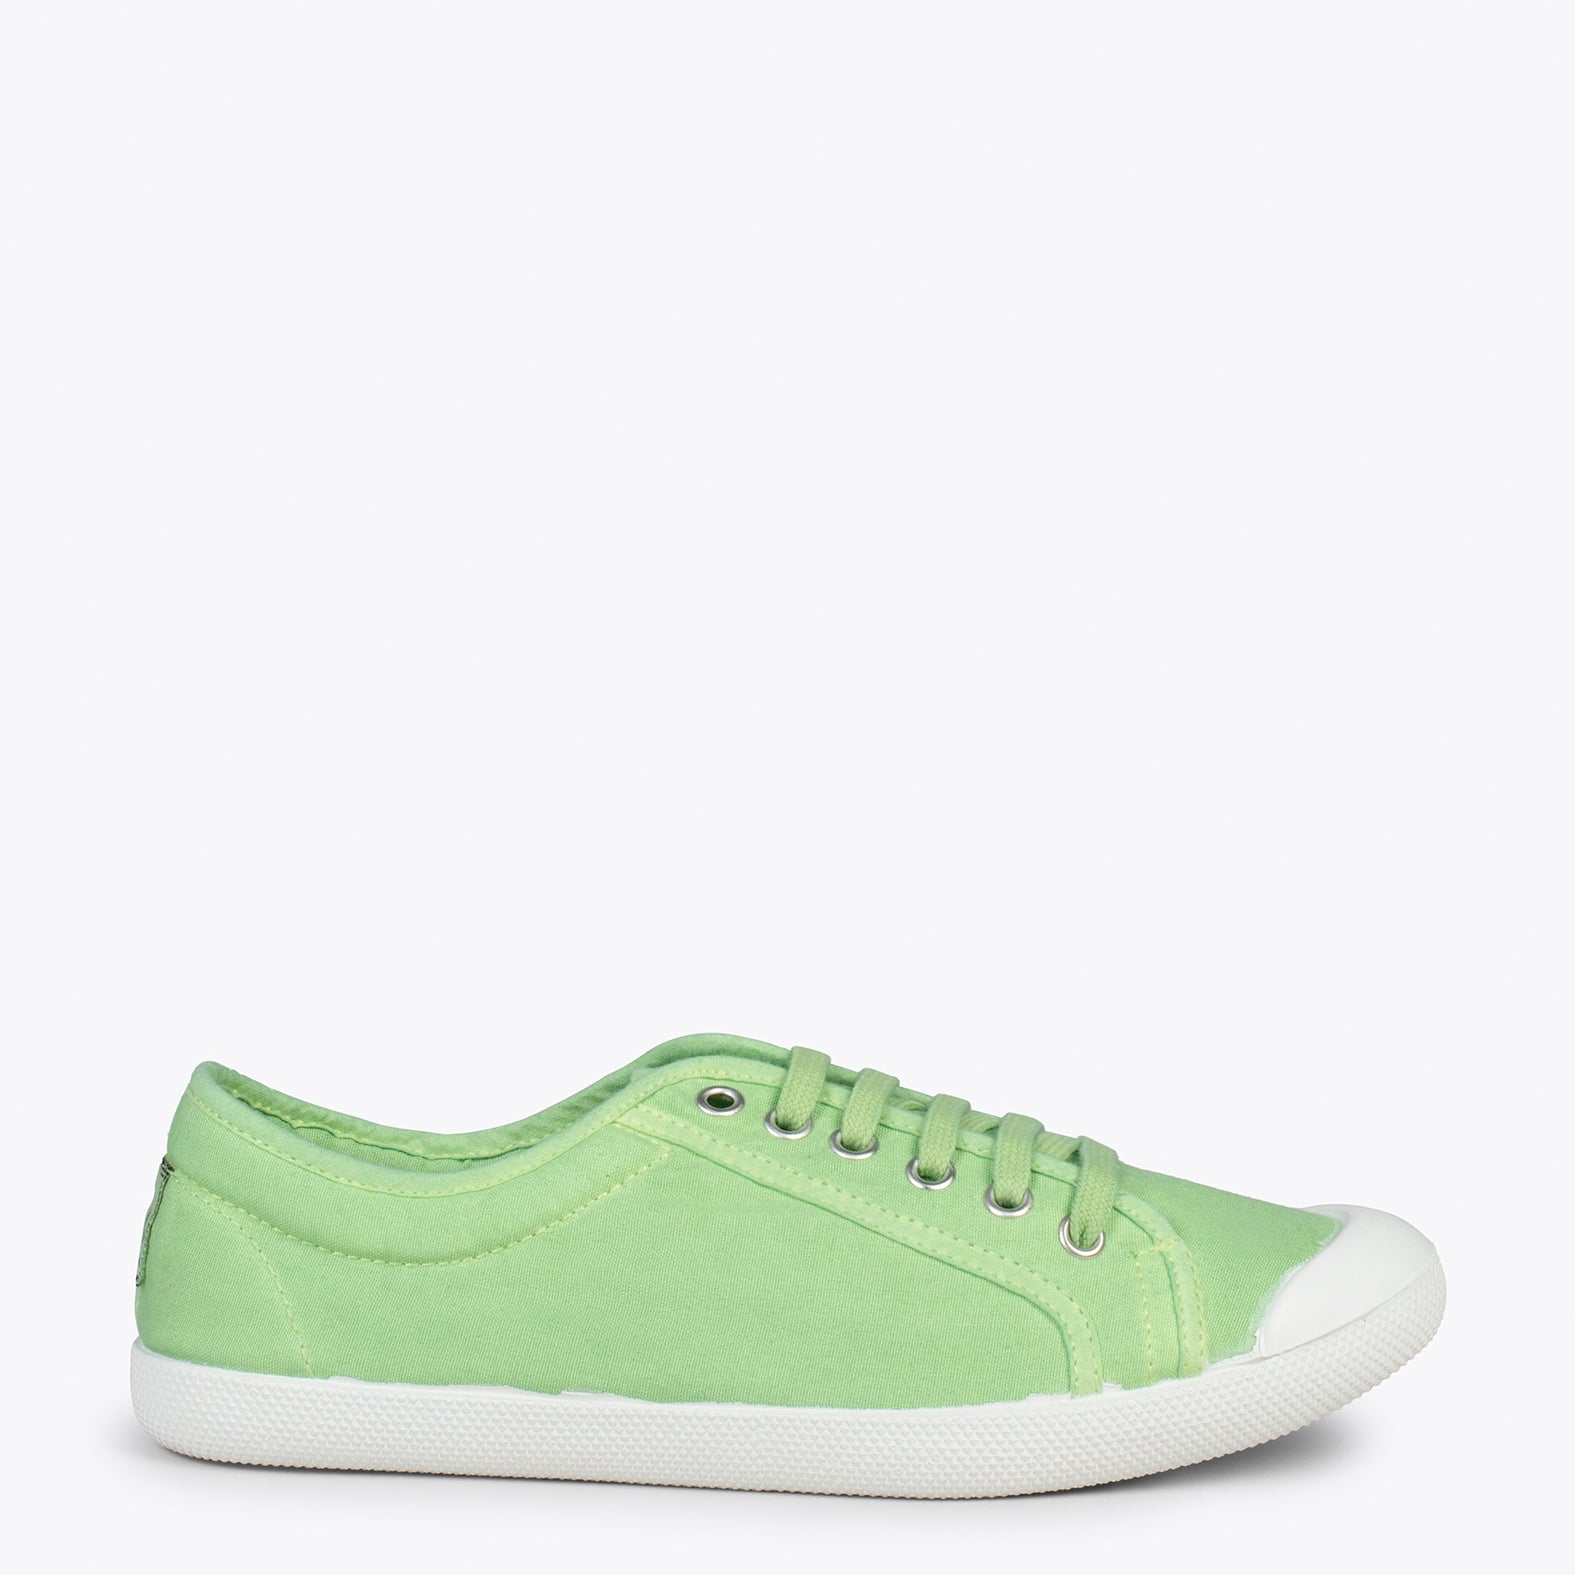 BAOBAB – GREEN BCI cotton sneakers from IO&GO